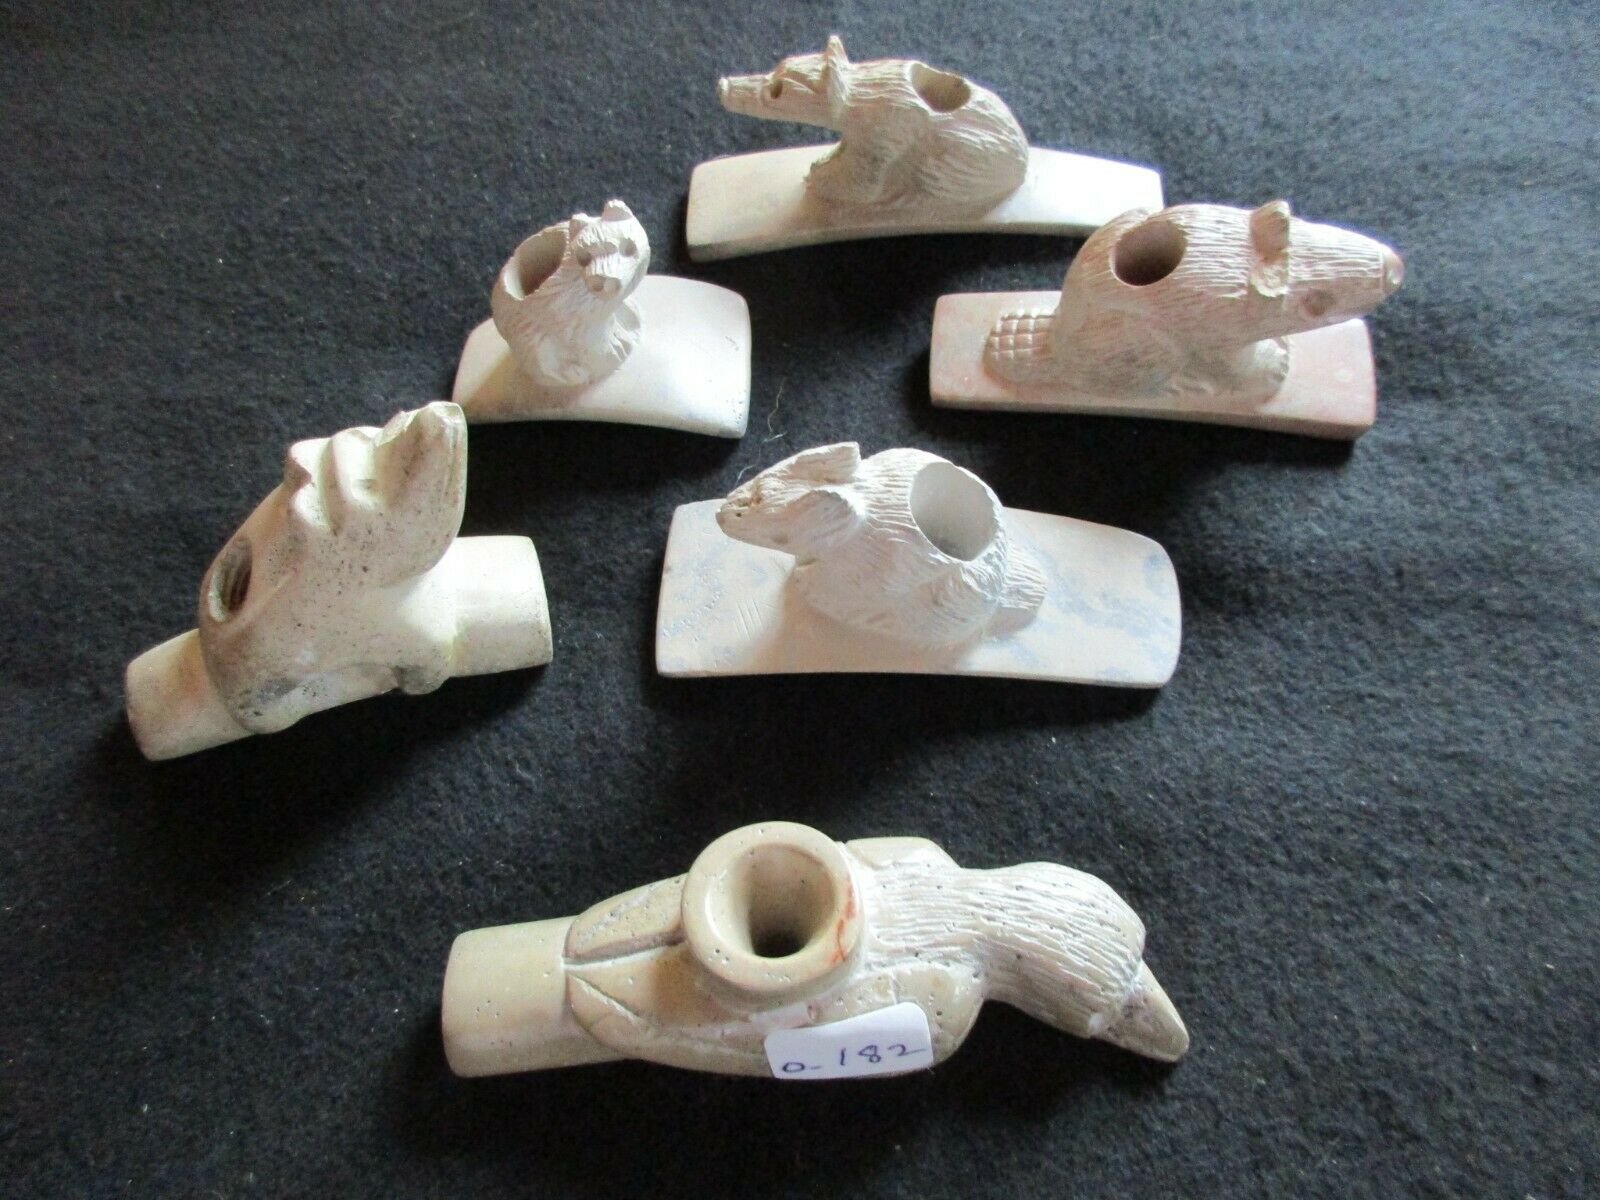 NATIVE AMERICAN CLAY PIPE ANIMAL EFFIGY GROUP, COLLECTOR'S CHOICE, PE-0821*05799